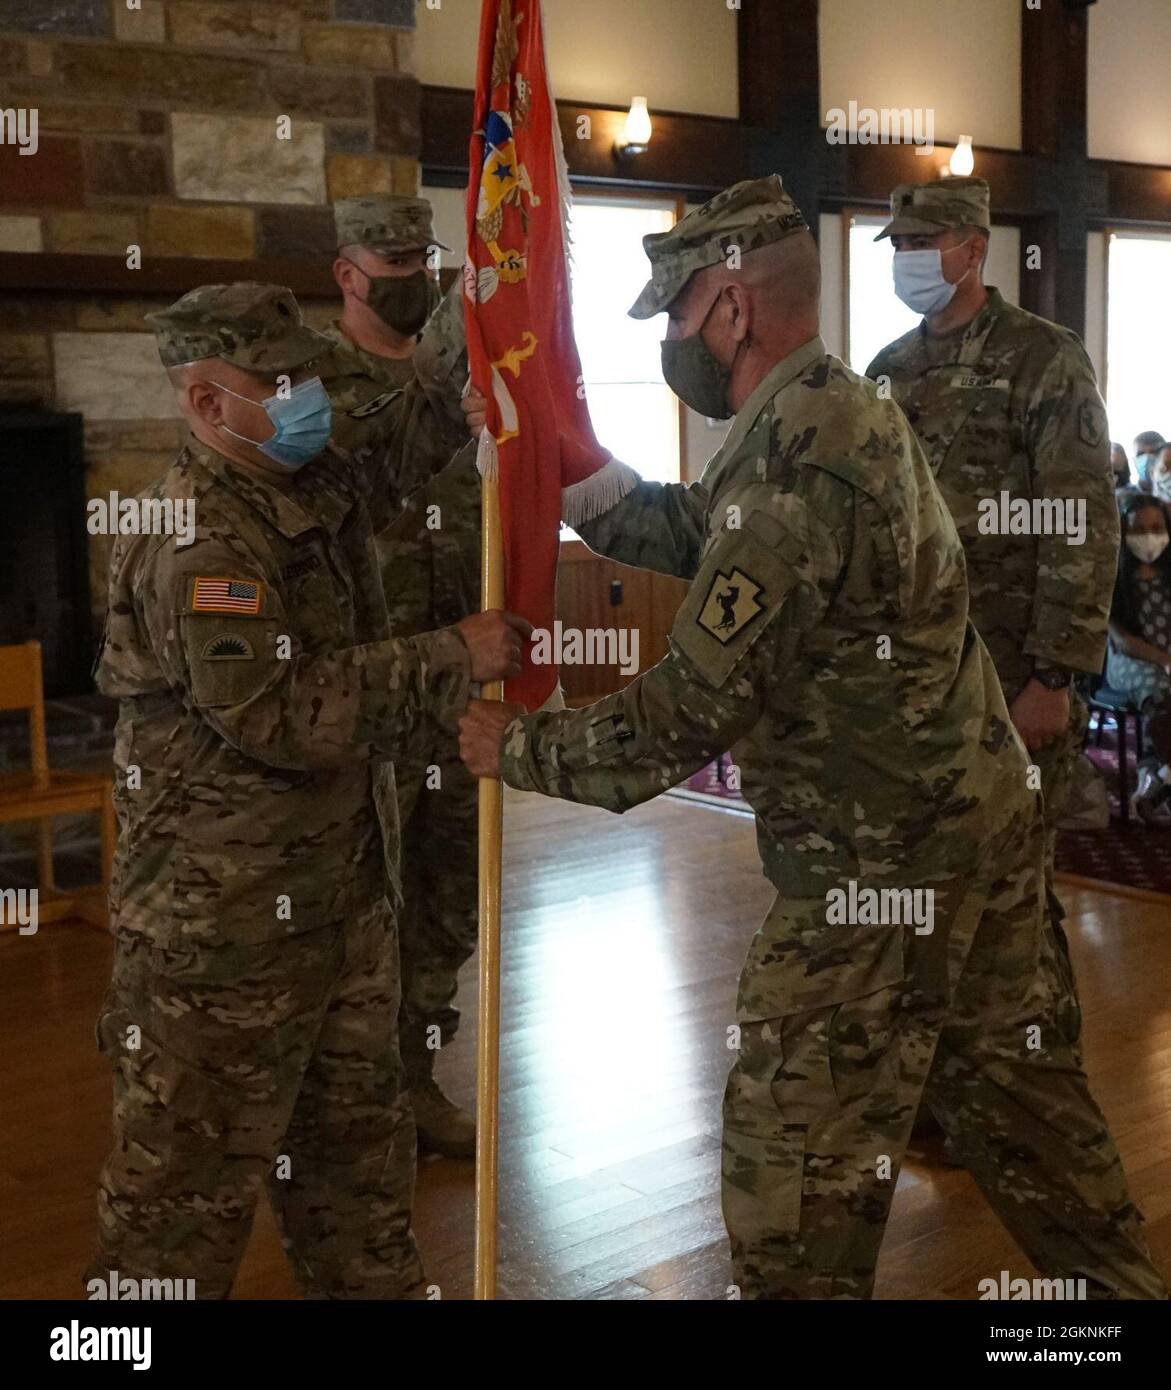 (Left to Right)  Lt. Col. Pasquale Pellegrino, Jr., outgoing commander of the 337th Engineer Battalion, receives the colors from Command Sgt. Maj. Brian Mcdermott, command sergeant major for the 337th EN BN, during the passing of the colors portion of the change of command ceremony on June 6 at Fort Indiantown Gap, Pa. Stock Photo